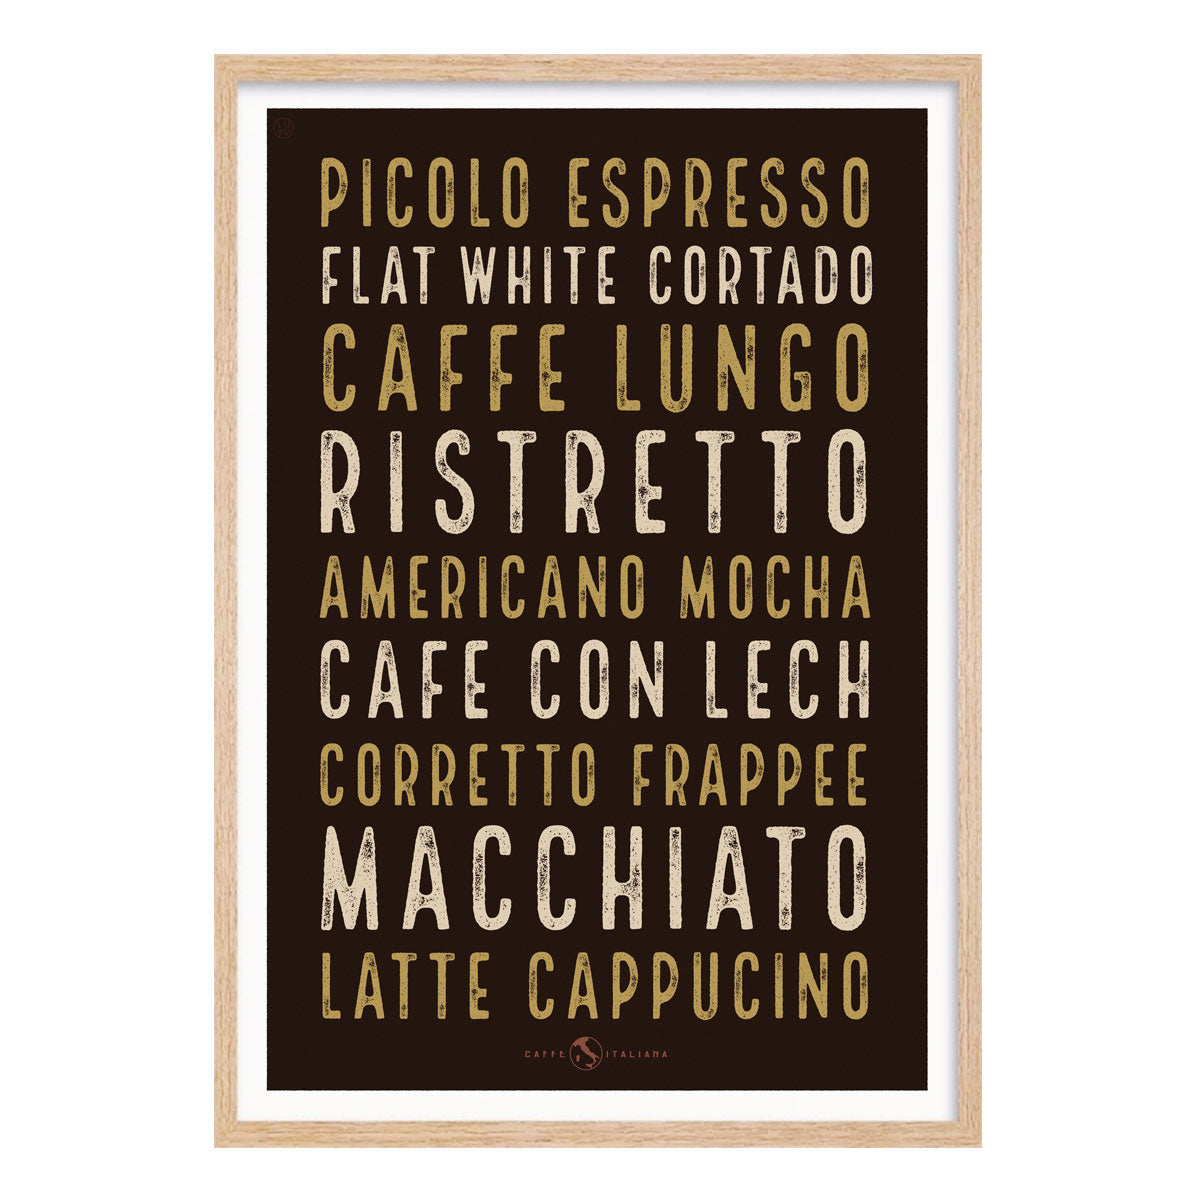 Italian cafe coffee retro poster print in oak frame from Places We Luv